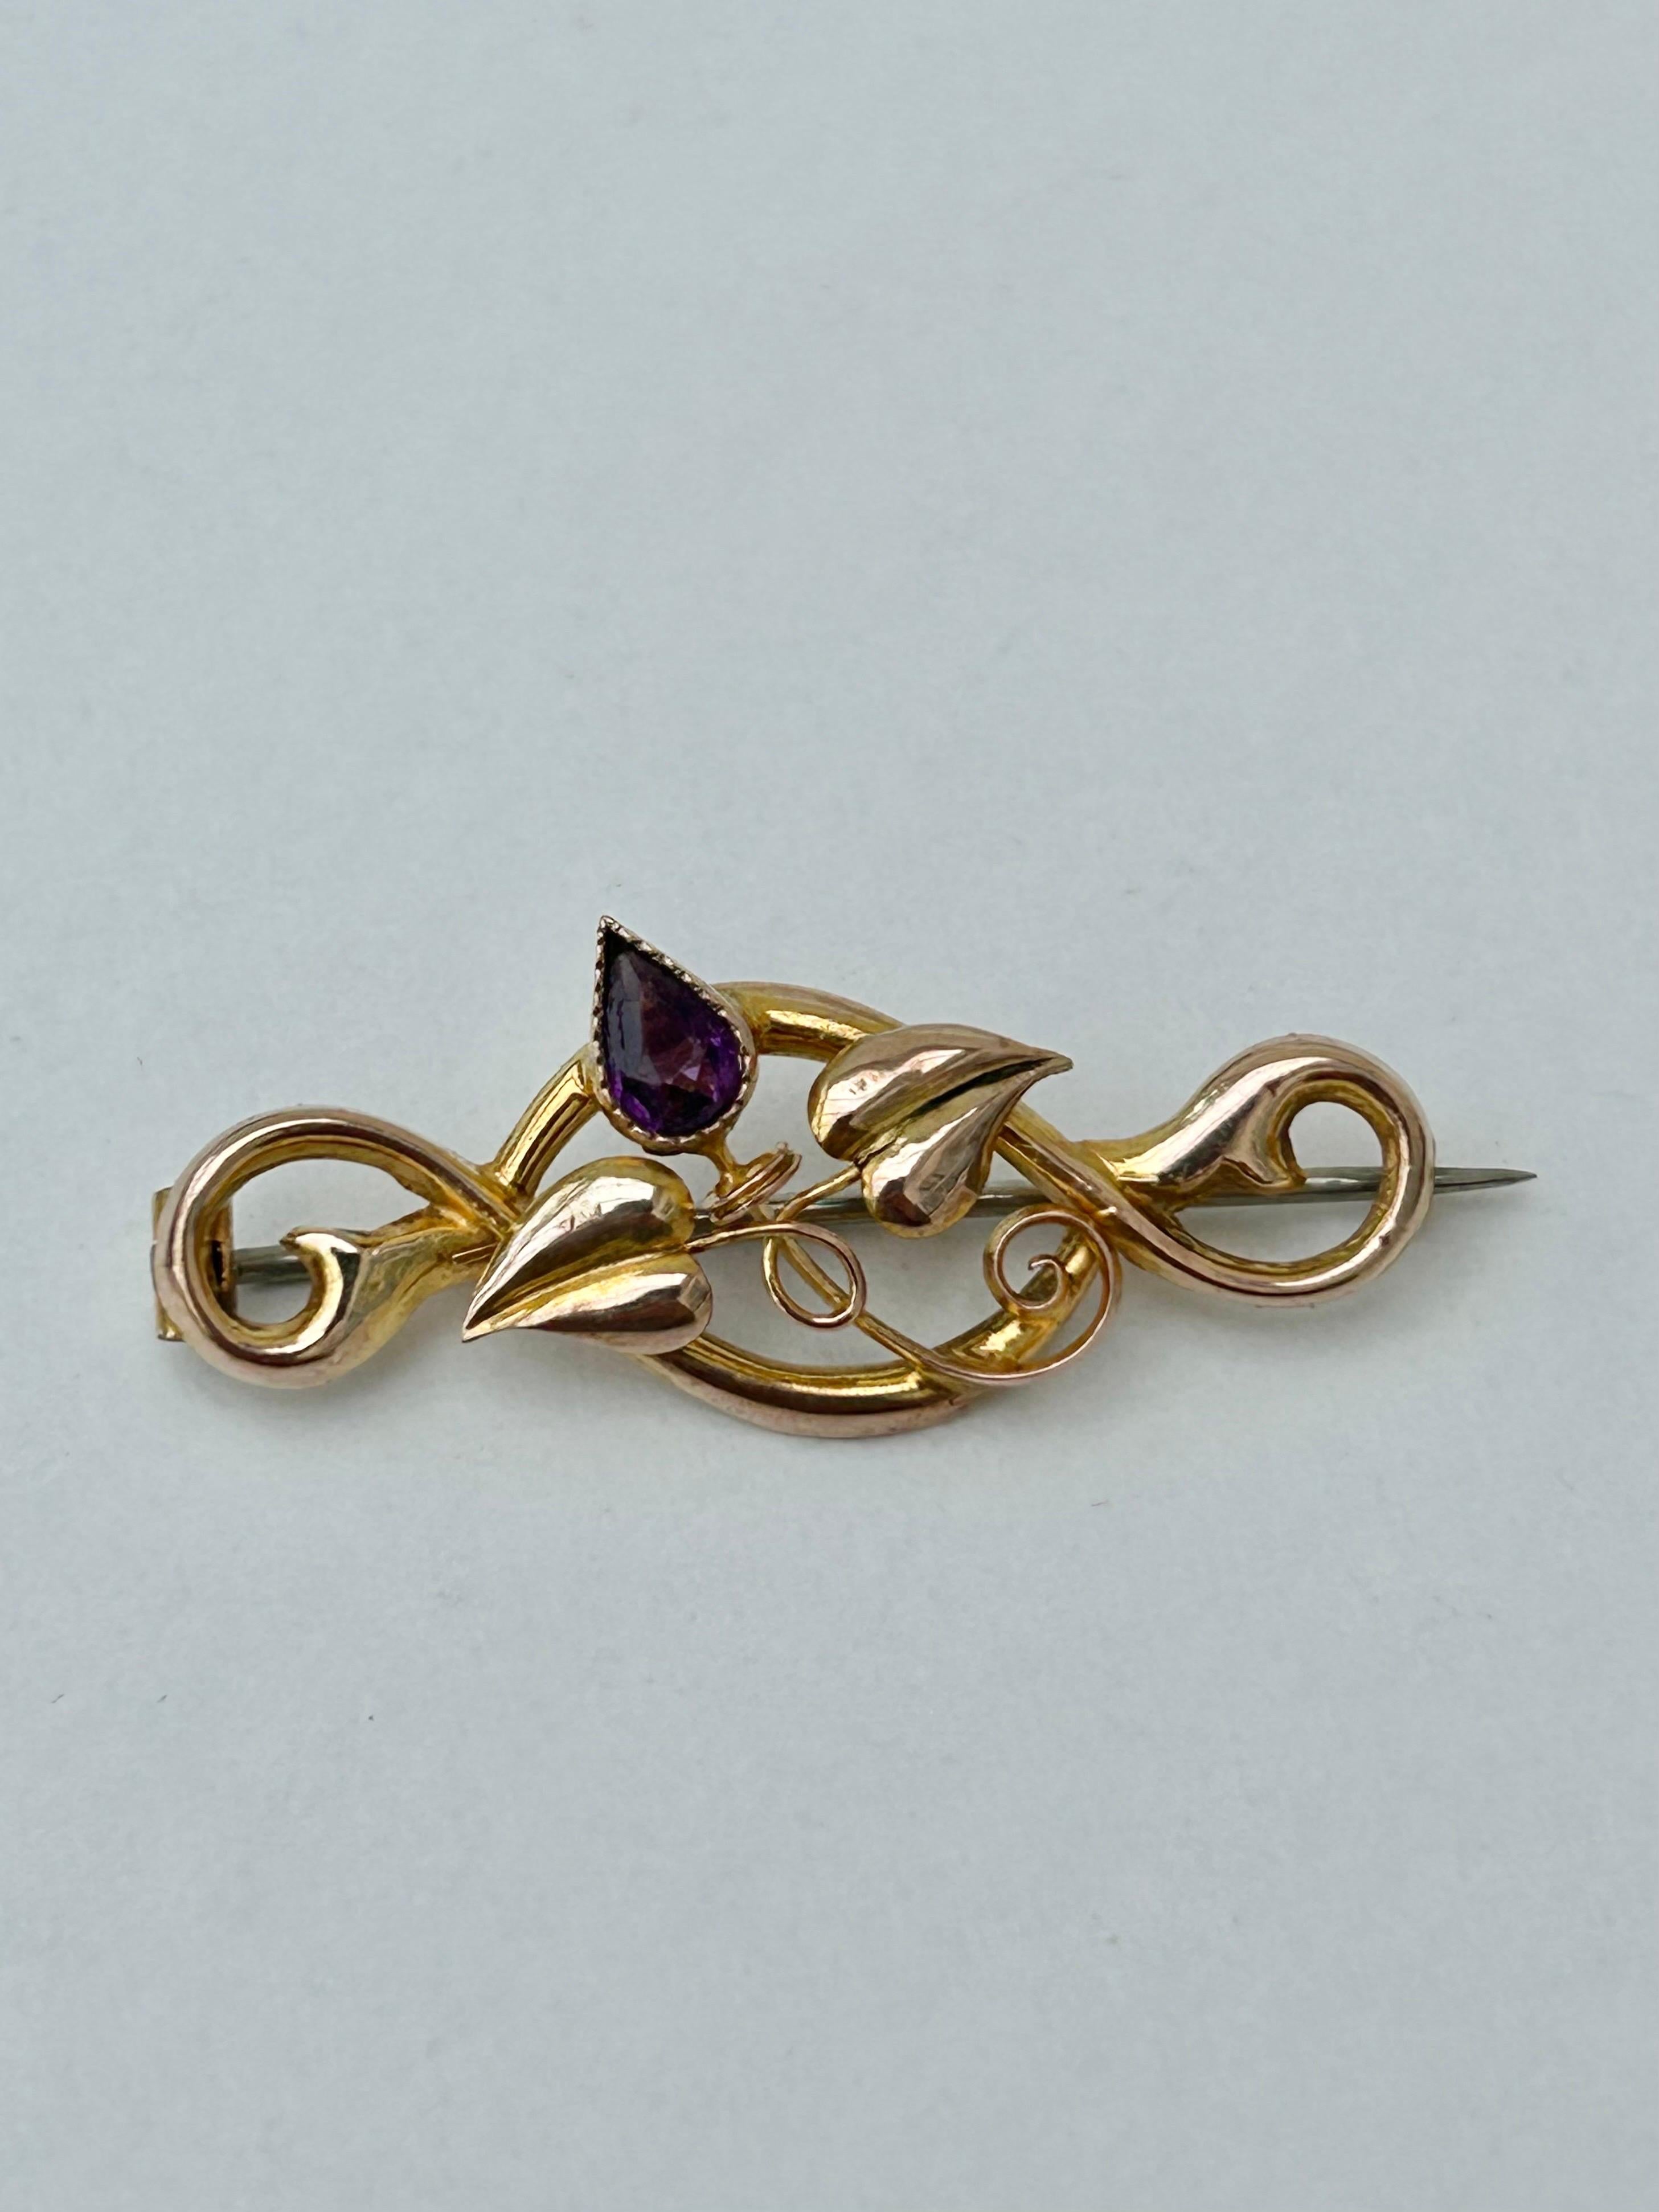 Artist Antique in Box Gold and Amethyst Leaf Brooch For Sale